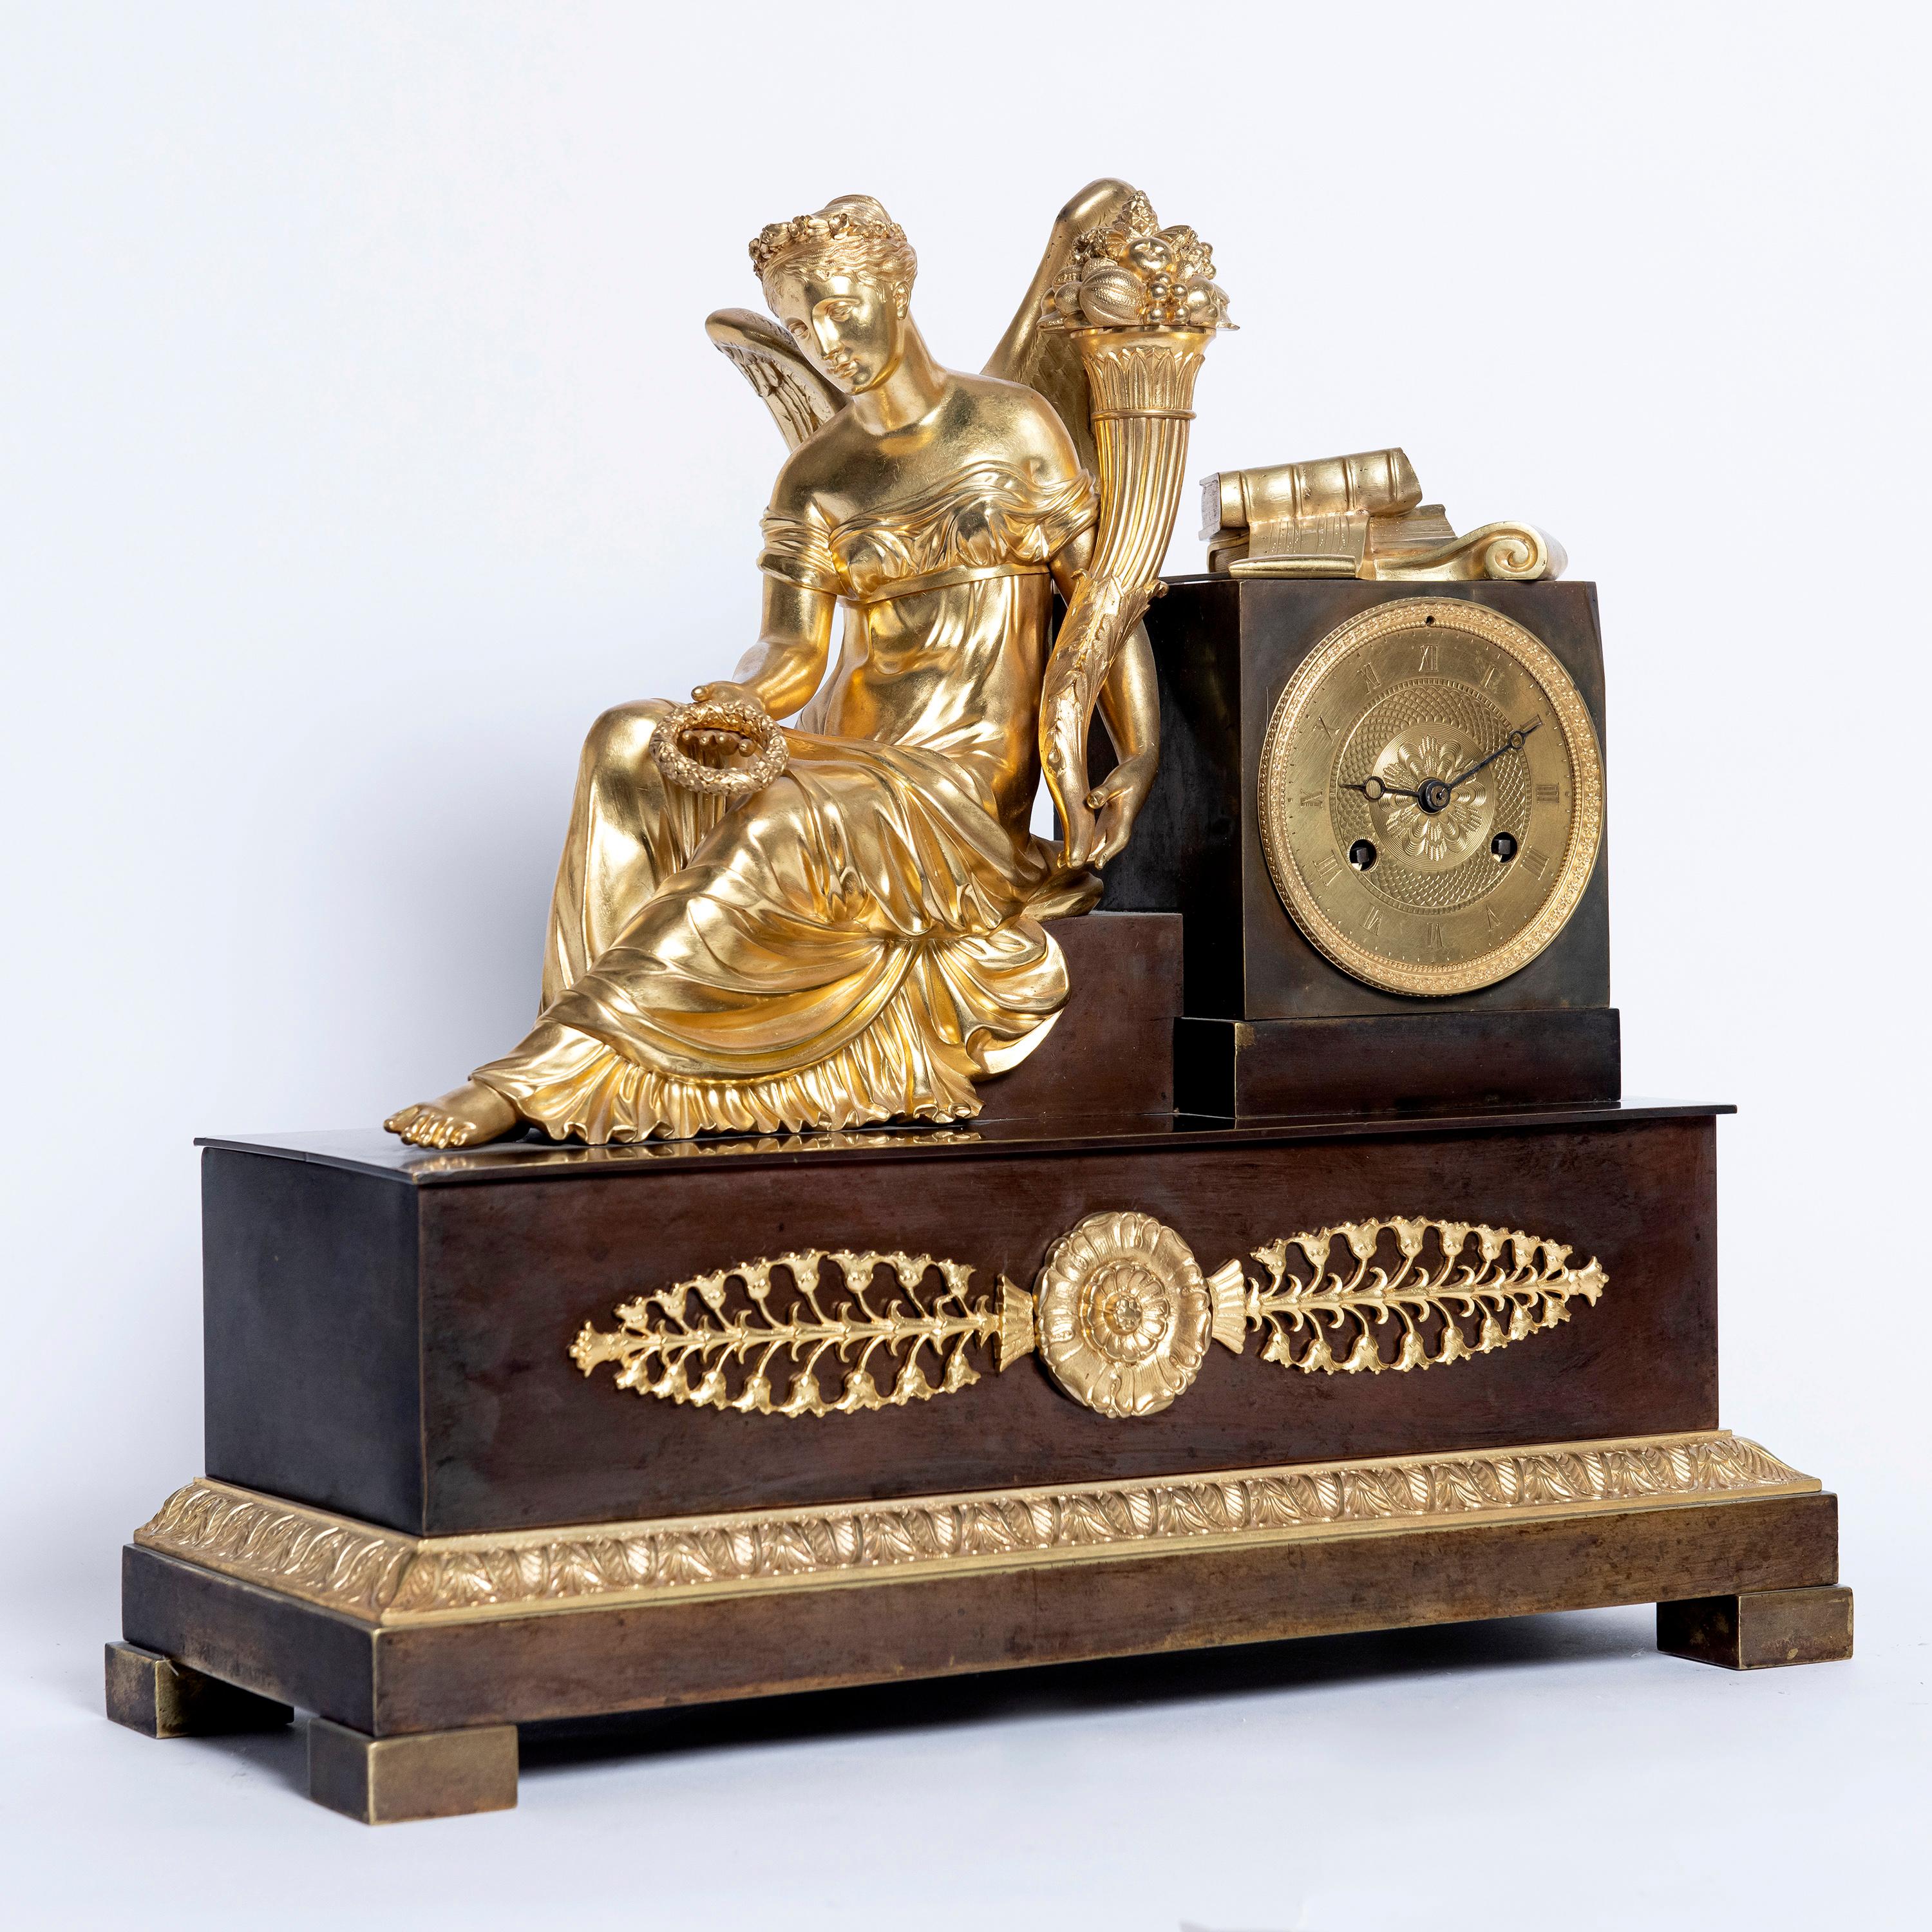 Gilt and patinated bronze mantel clock, machine signed L. Moinet A Paris. France, early 19th century.